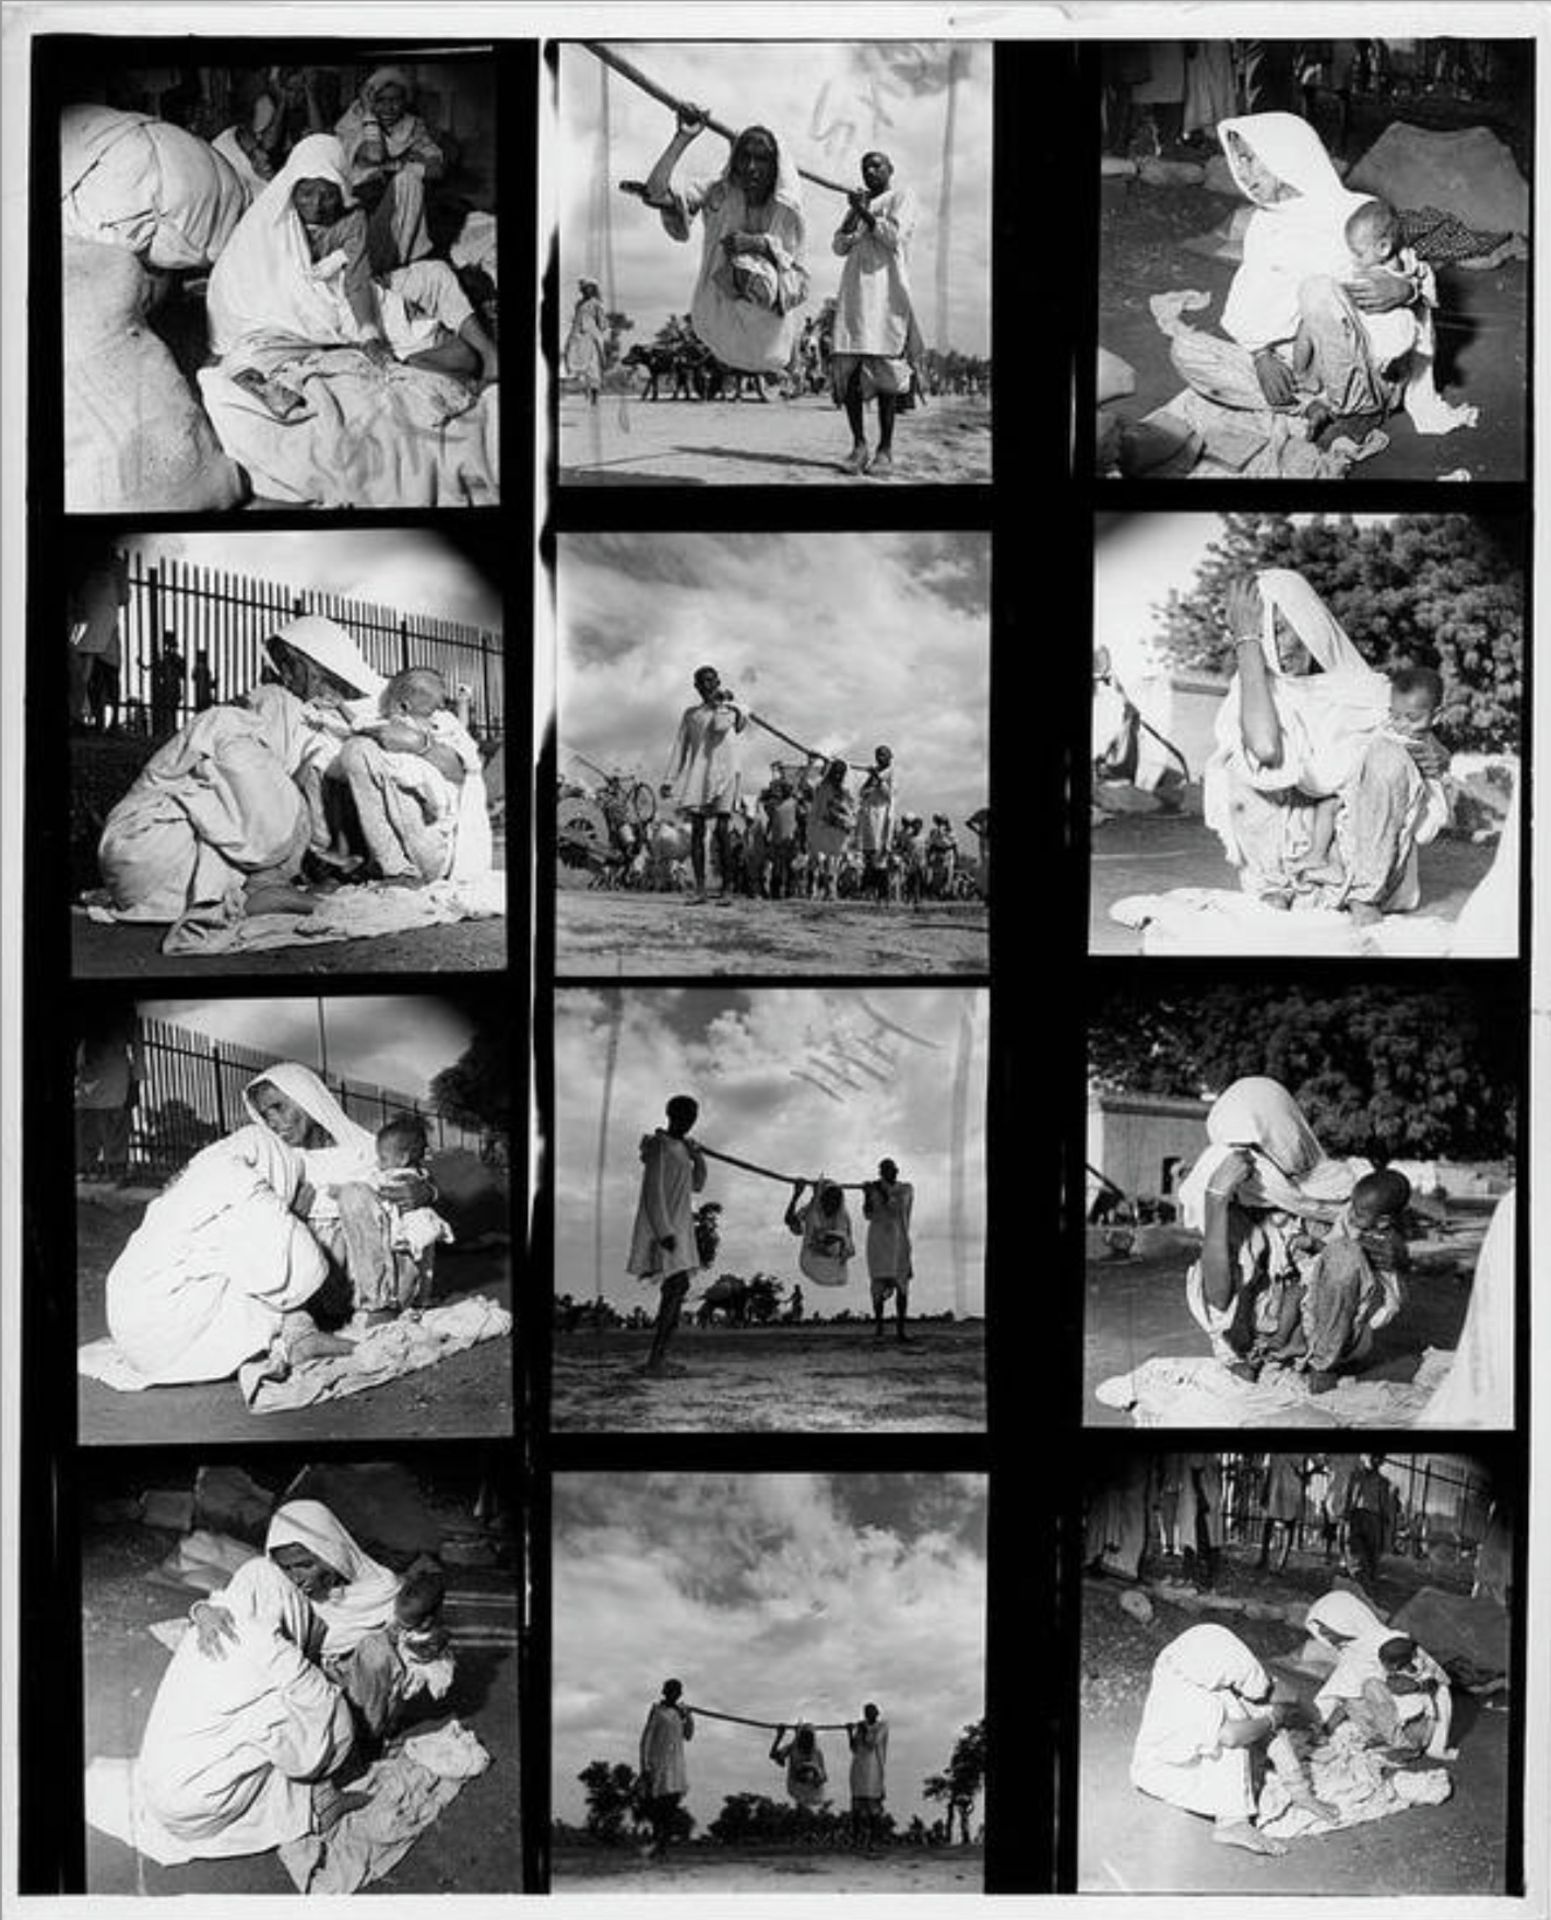 Margaret Bourke White "India Migration during Hindu-Muslim Conflict" Contact Sheet